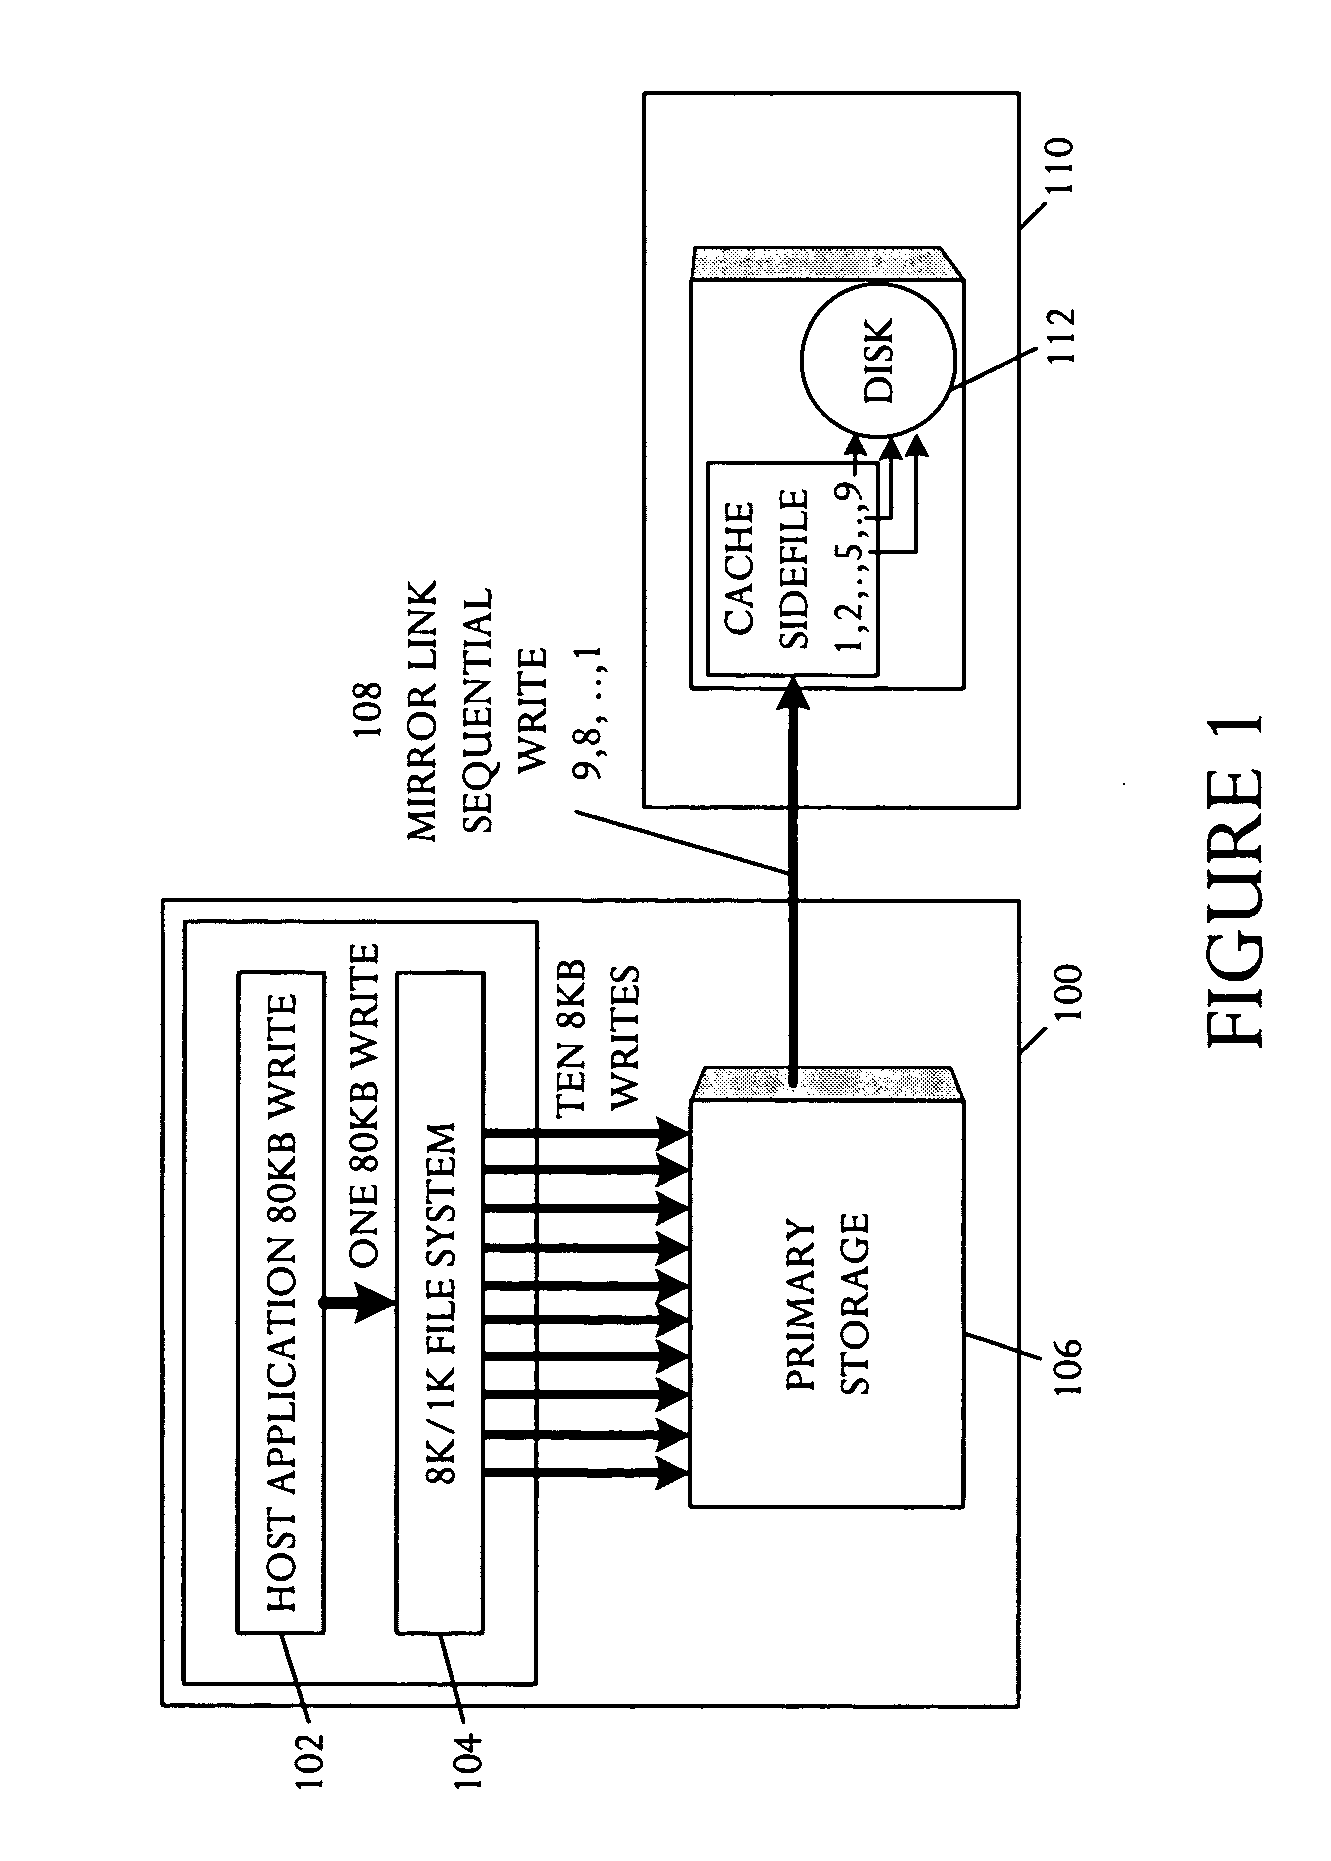 System for preserving logical object integrity within a remote mirror cache